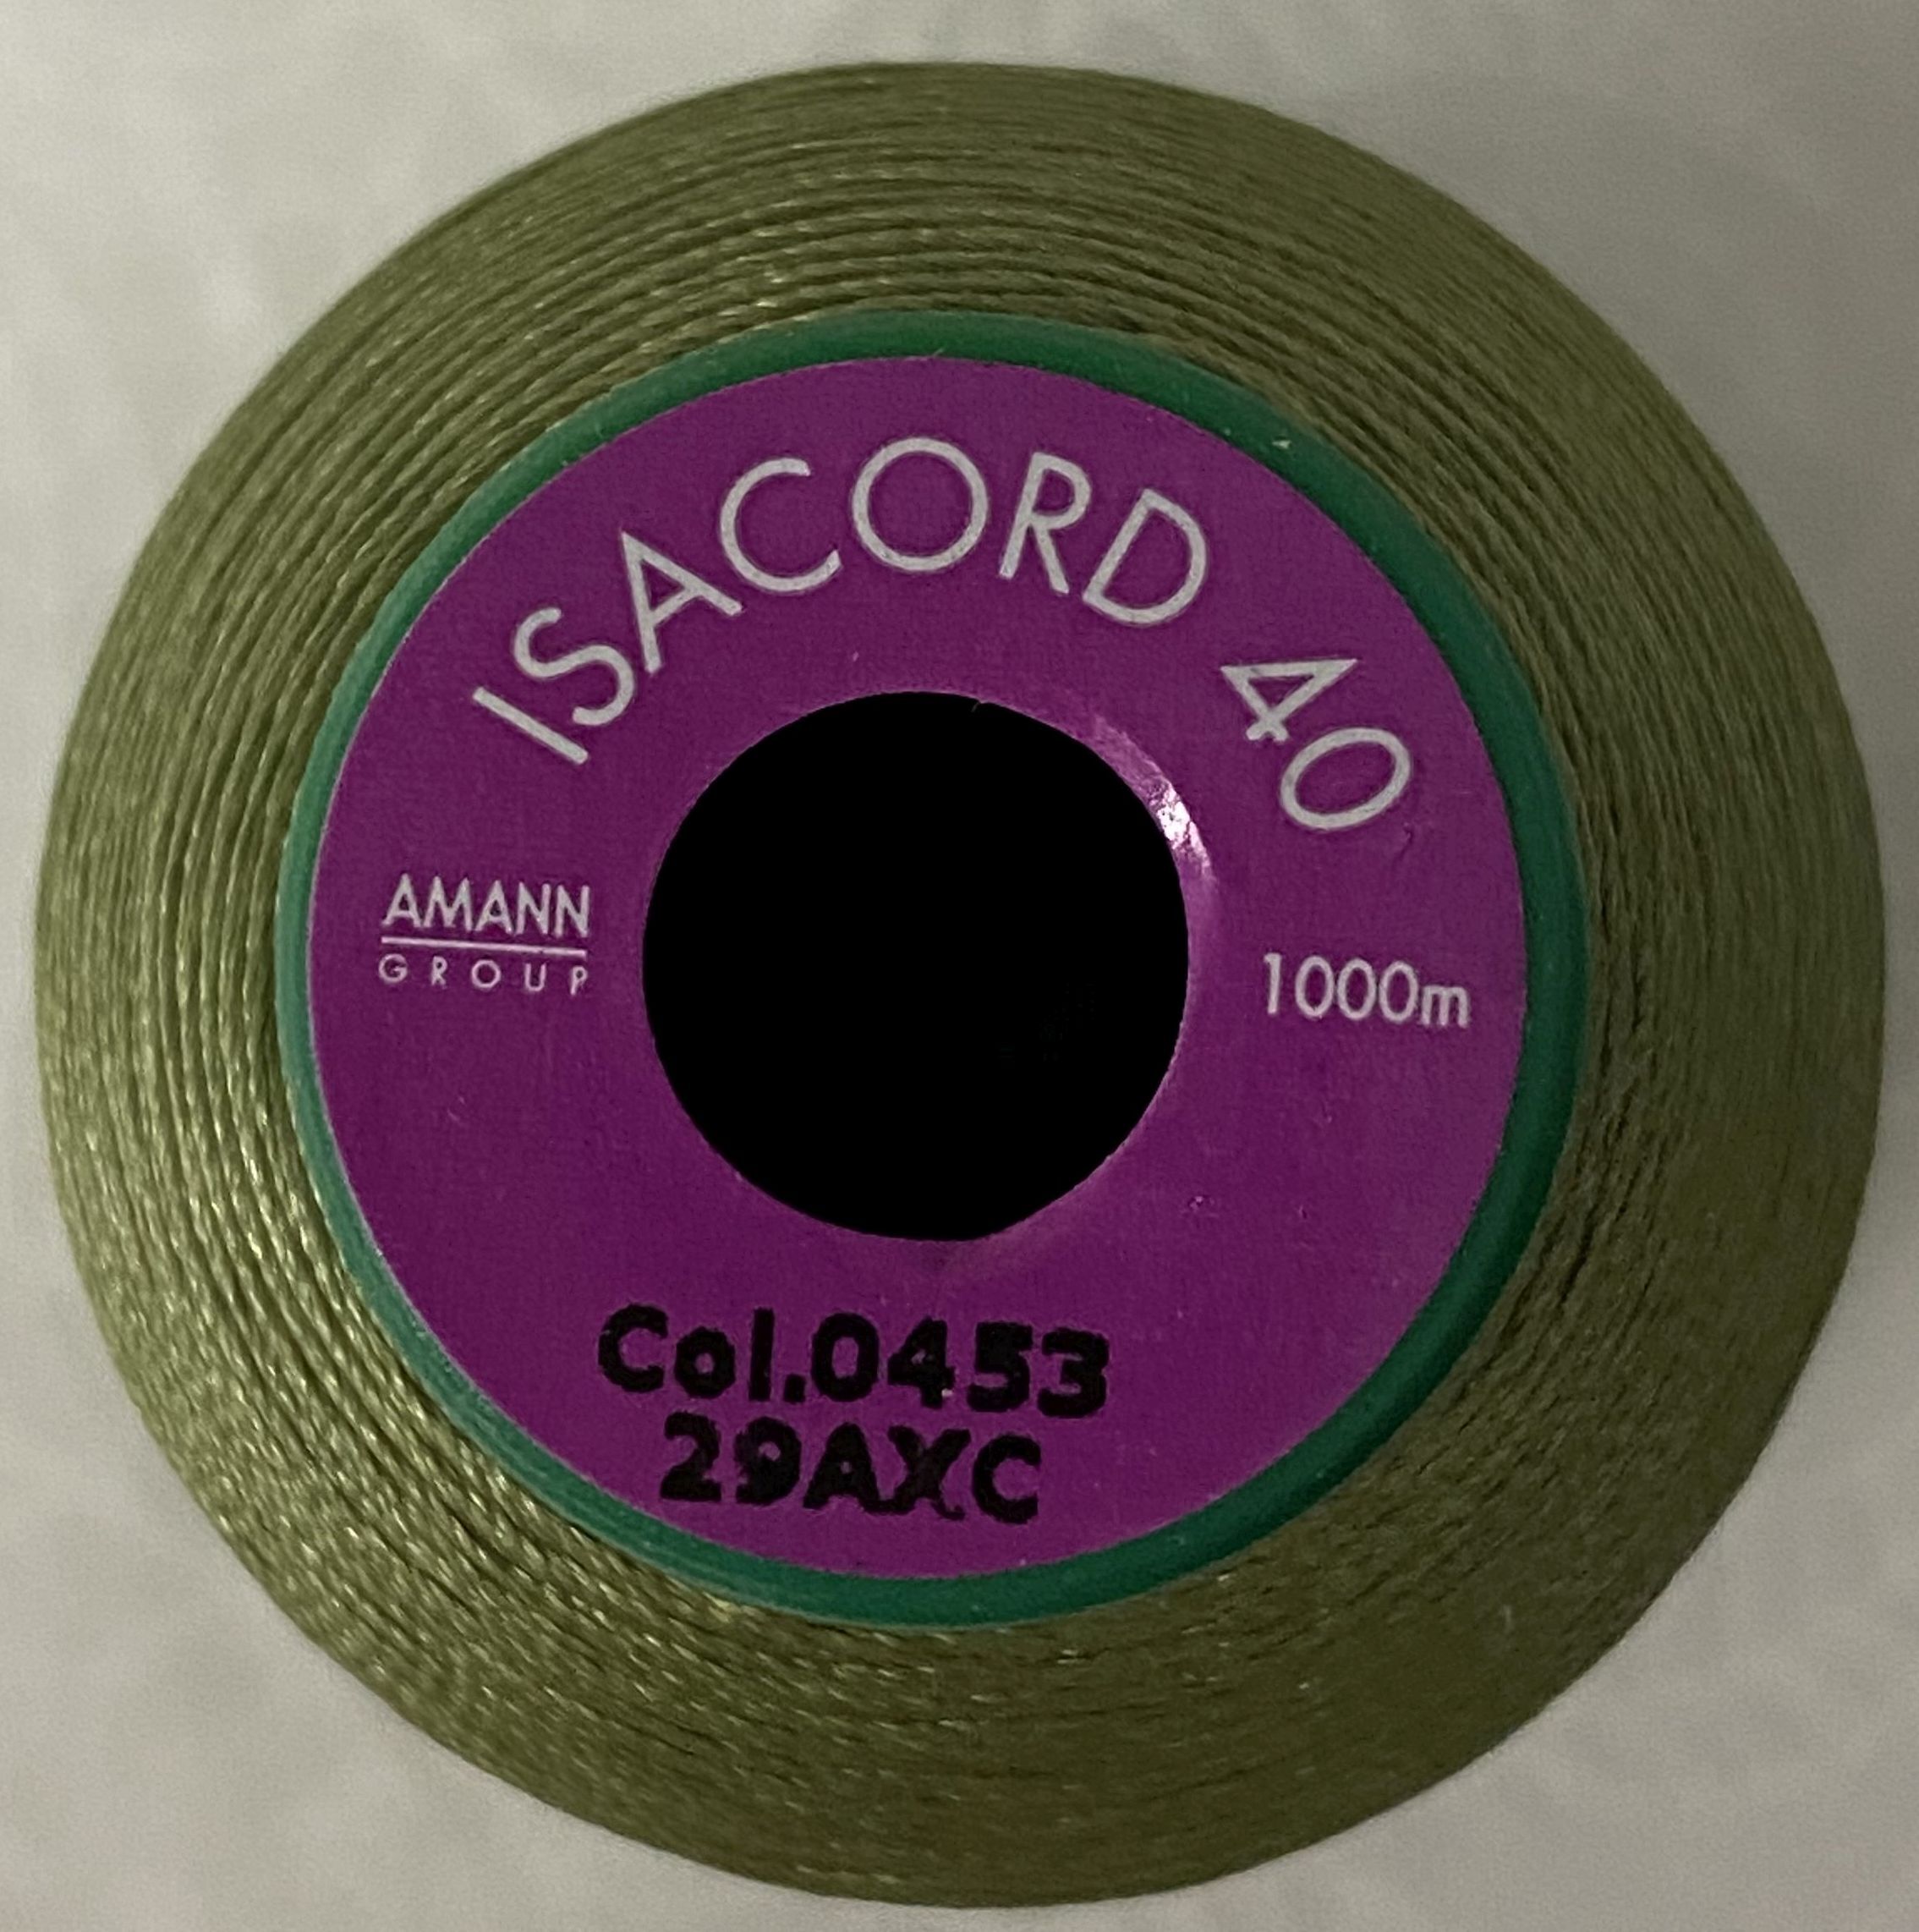 ISACORD 40 #0453 ARMY DRAB GREEN 1000m Machine Embroidery Sewing Thread